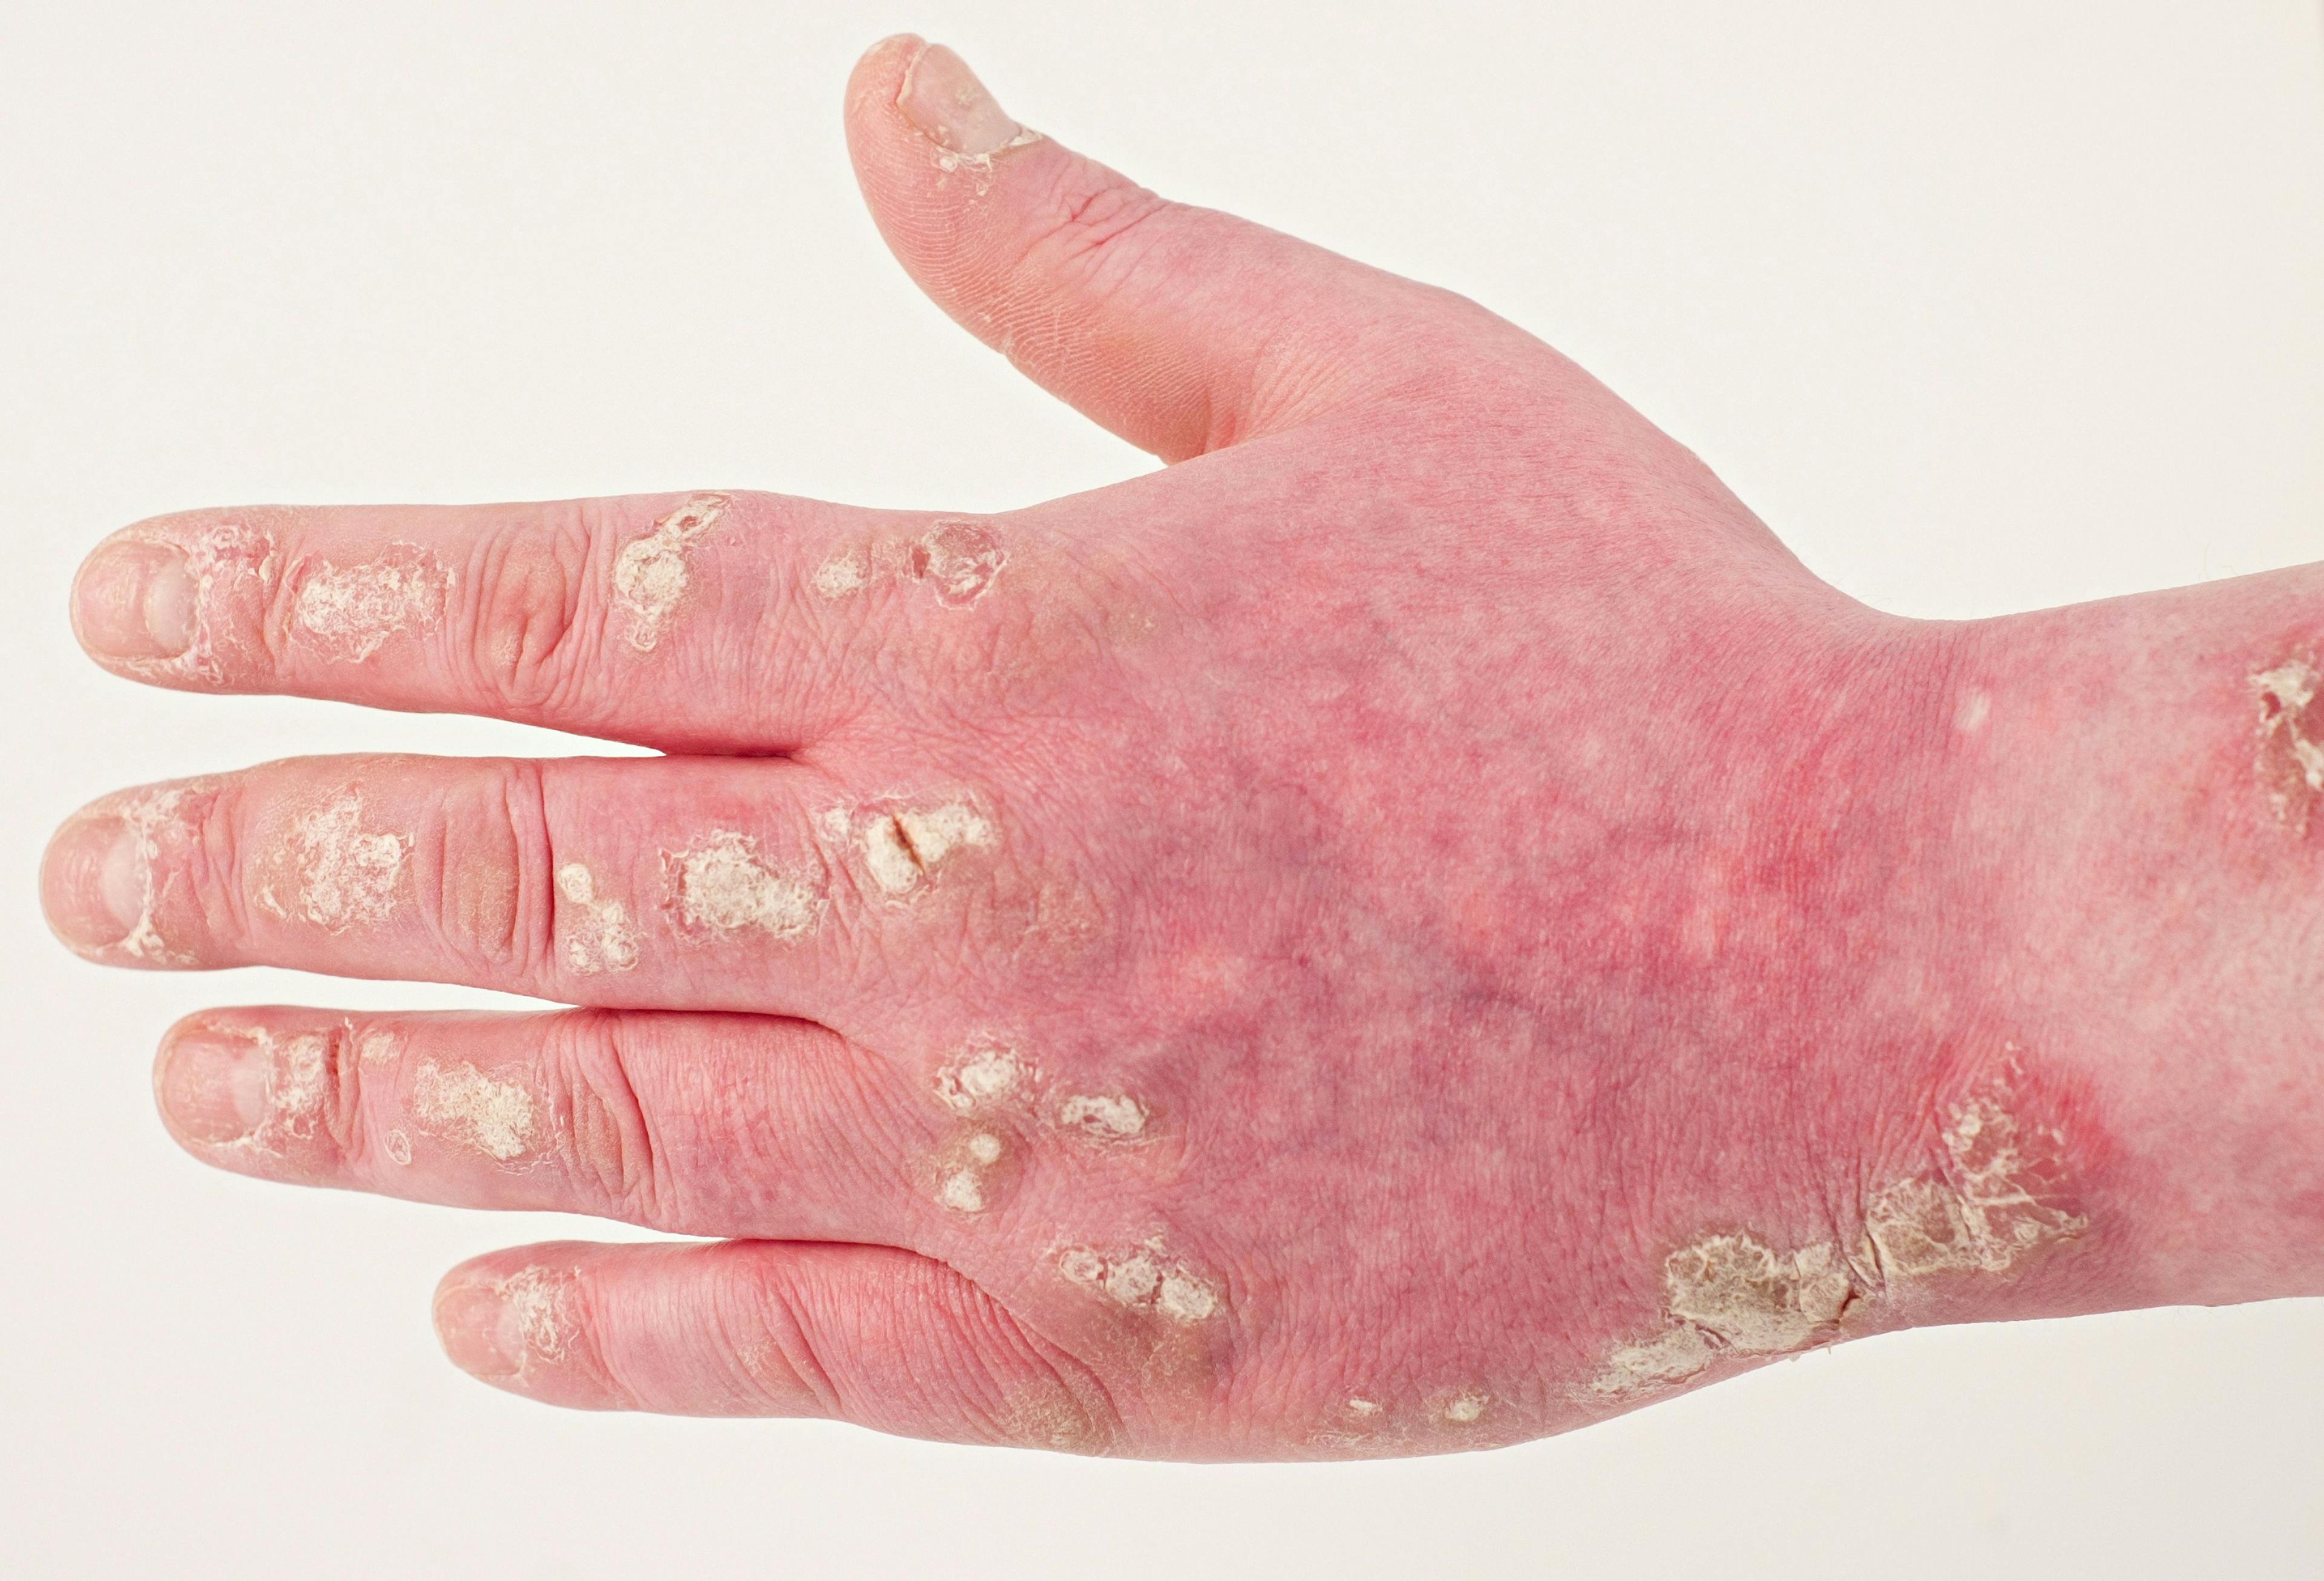 Patients With Refractory Psoriasis Helped by Combination Therapy, Case Study Finds